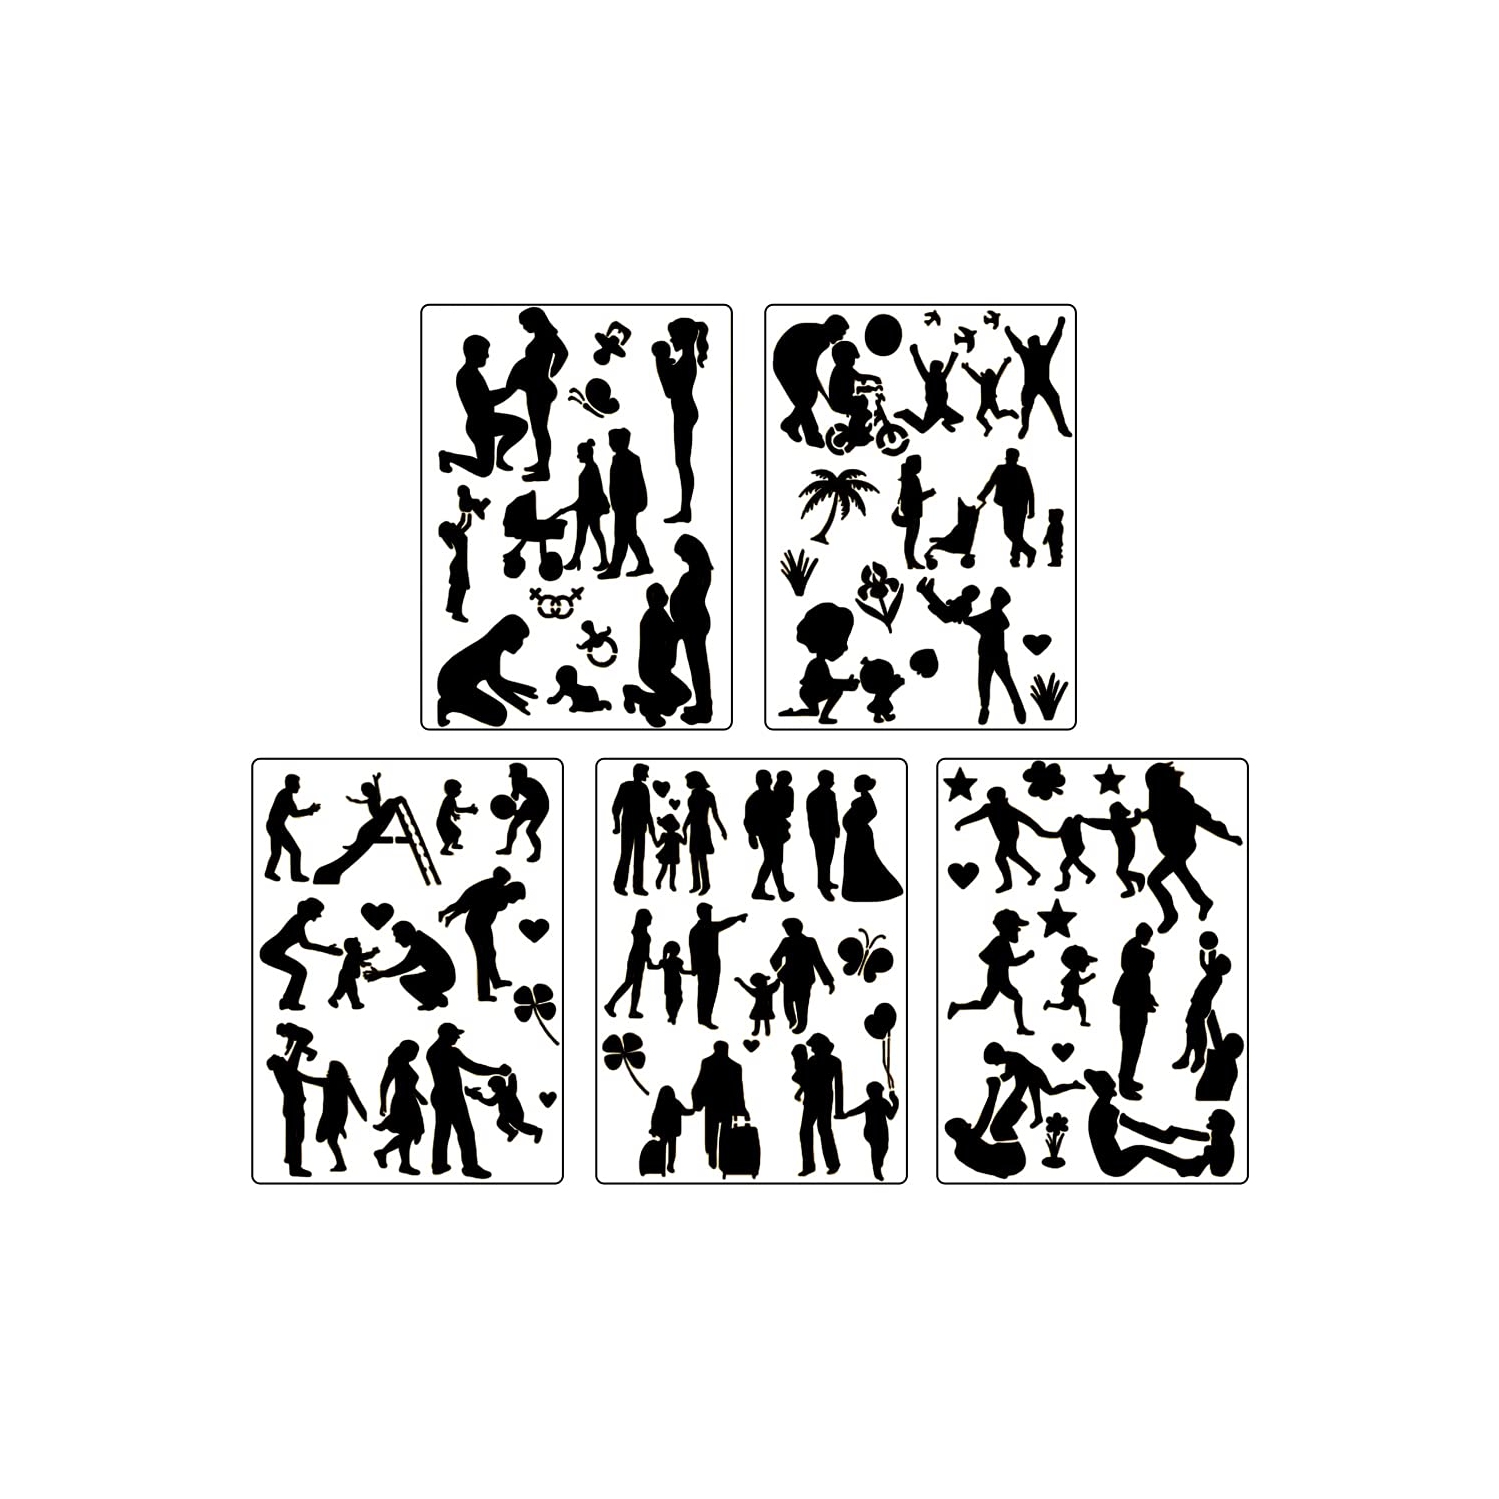 ArtEase 5Pcs Reusable Hollow Painting Silhouette Stencils - Fast Draw Stencil Art Templates for DIY Drawing, Graffiti, and Parent-Child Bonding - Ideal for Adults and Children